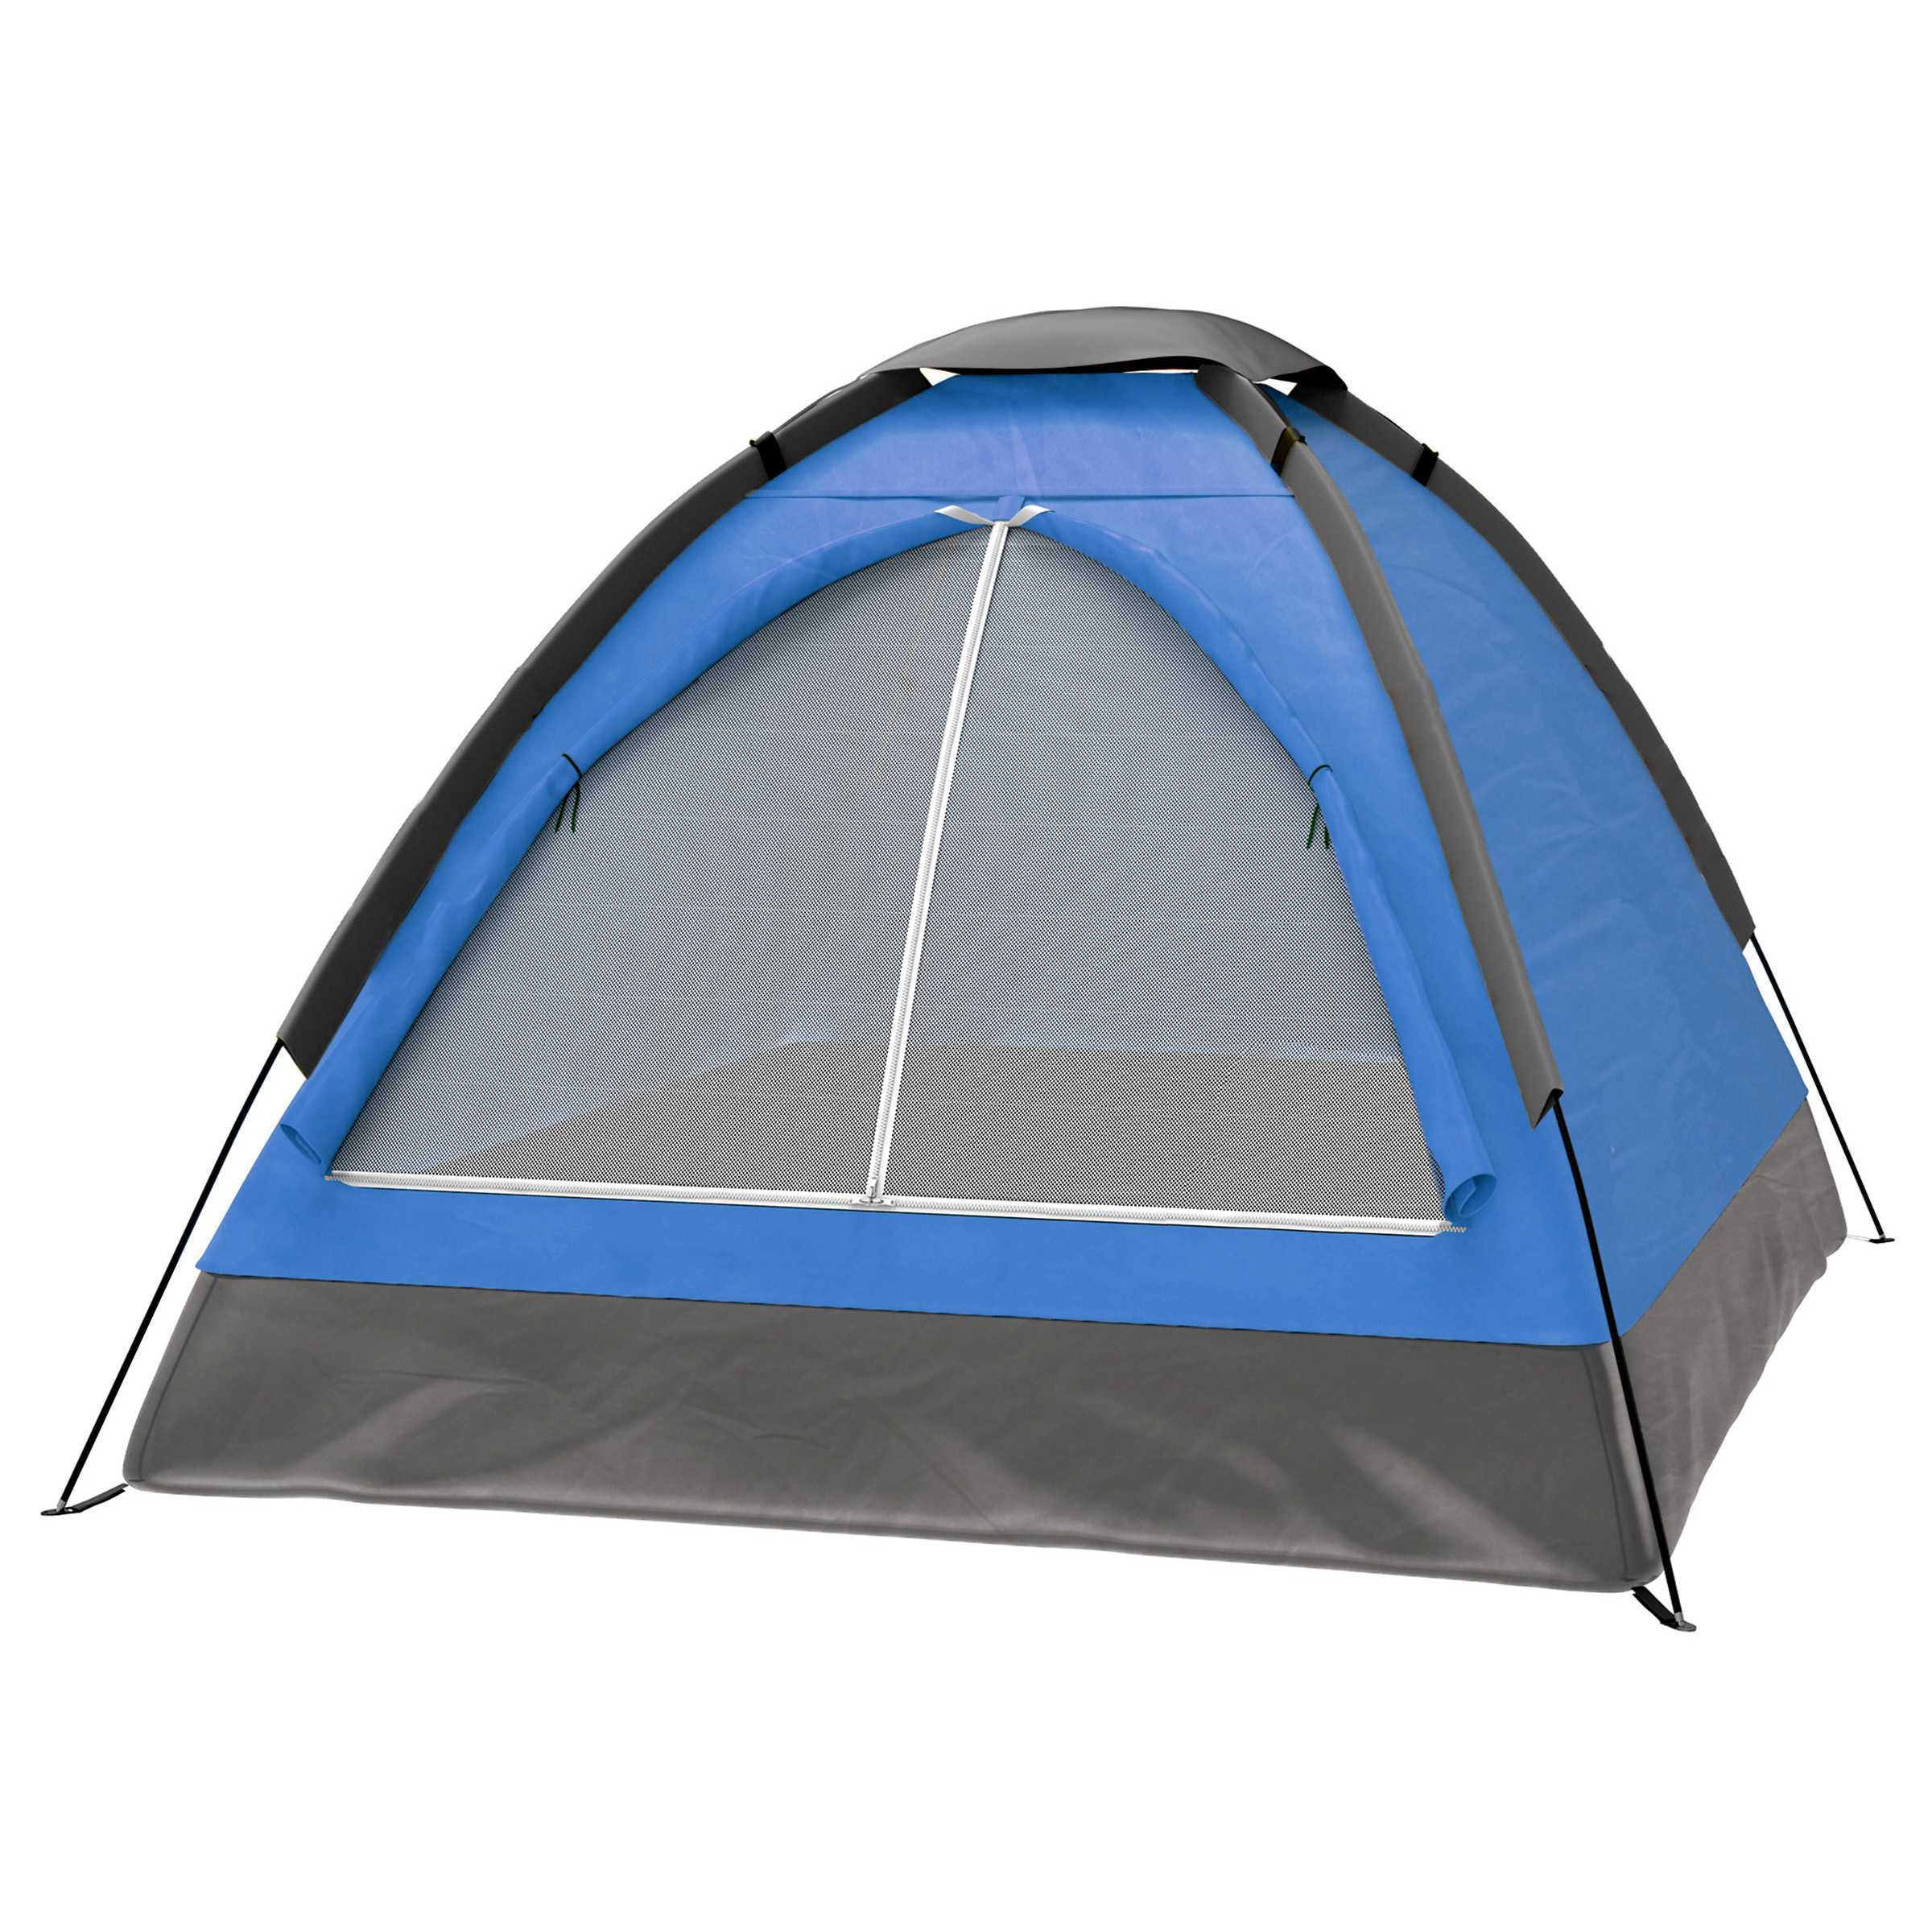 2-Person Camping Tent ? Includes Rain Fly and Carrying Bag ? Lightweight Outdoor Tent for Backpacking Hiking or Beach by Wakeman Outdoors (Blue) - image 1 of 10